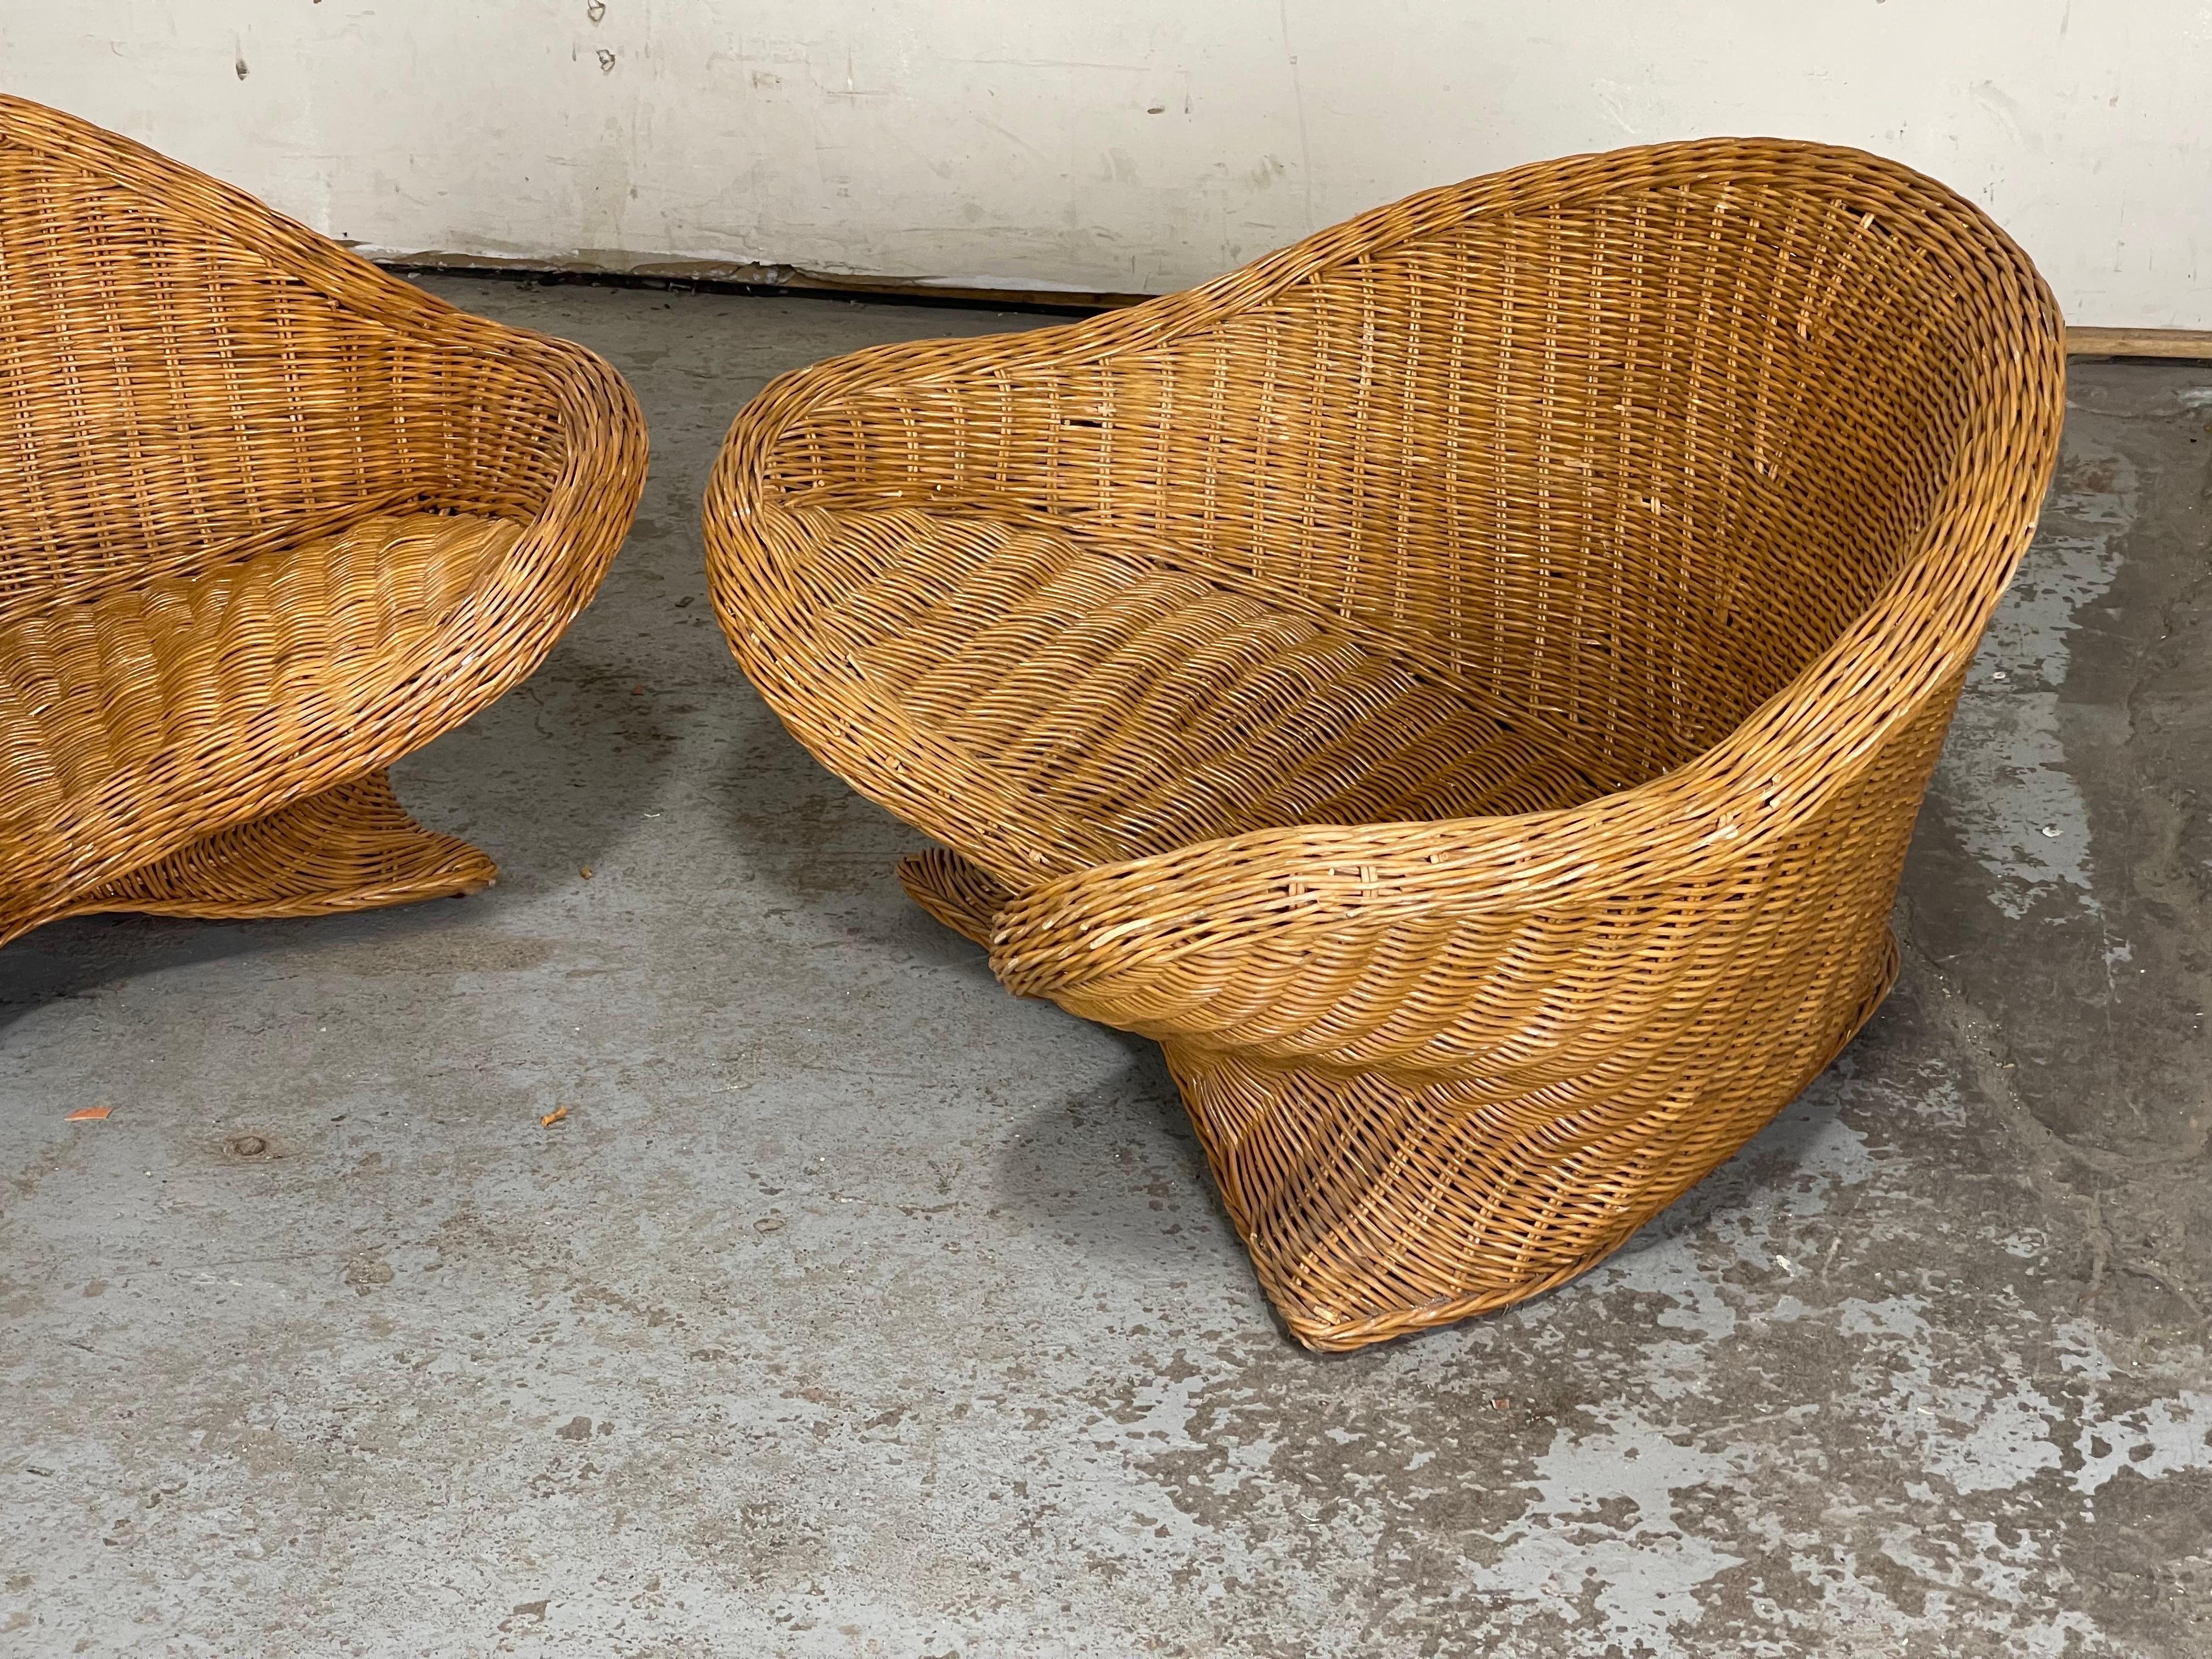 Late 20th Century Mid Century Modern Petite Rattan Lotus Chairs by Vivai del Sud, Italy